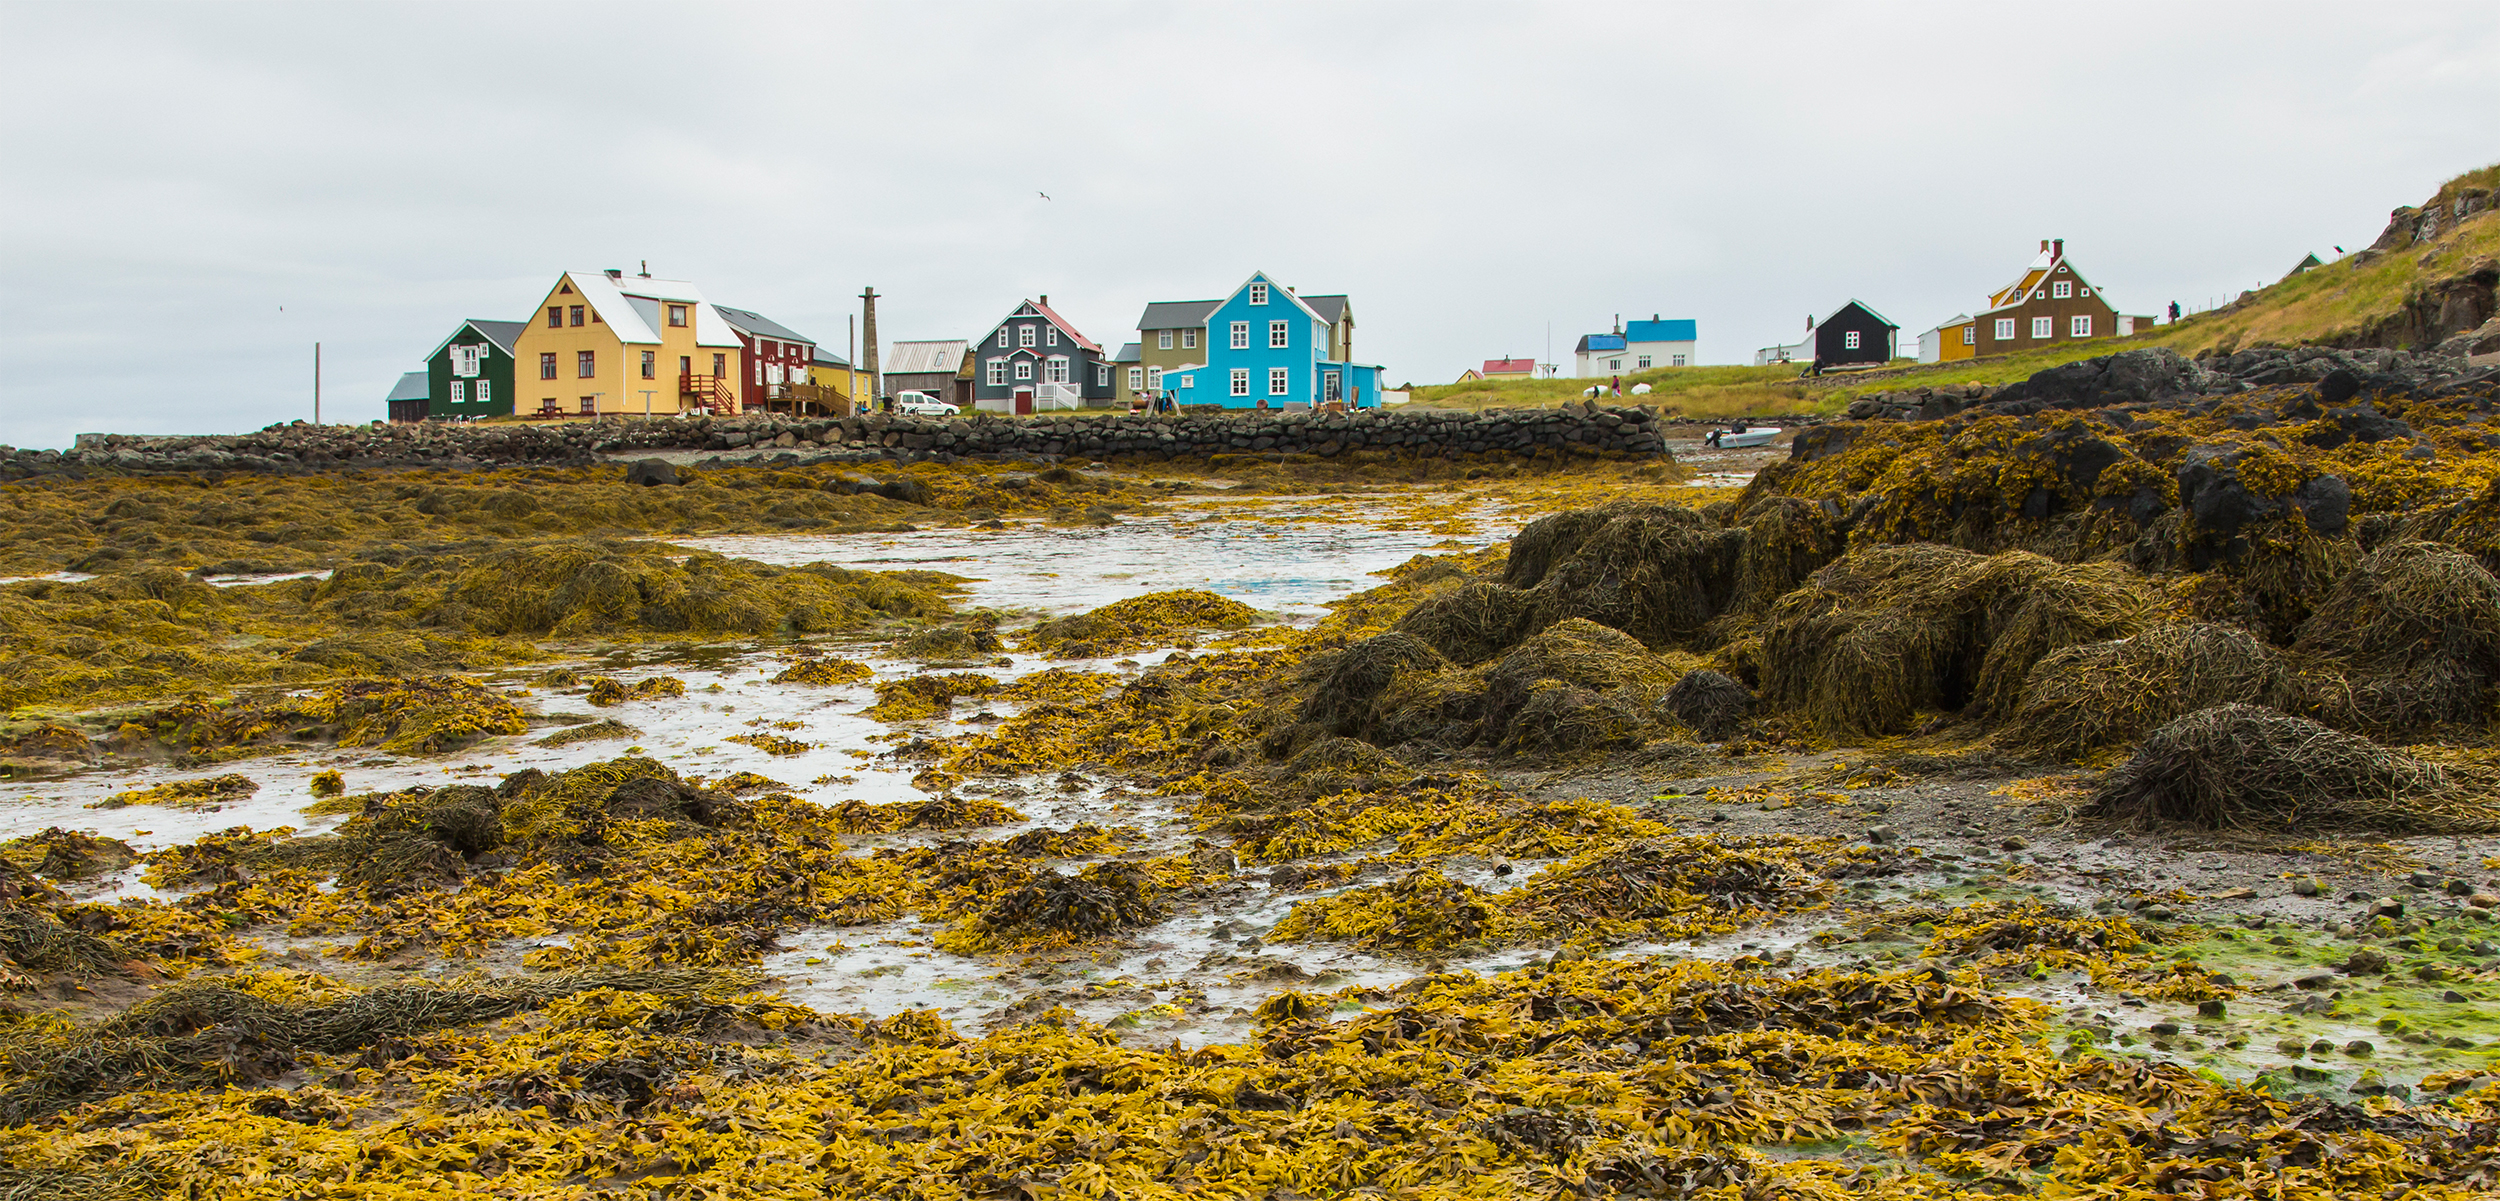 In one Icelandic community, wild rockweed is an economic blessing. Seasonally, workers harvest, dry, and export wild rockweed for animal feed. Photo by Ralph Lee Hopkins/Getty